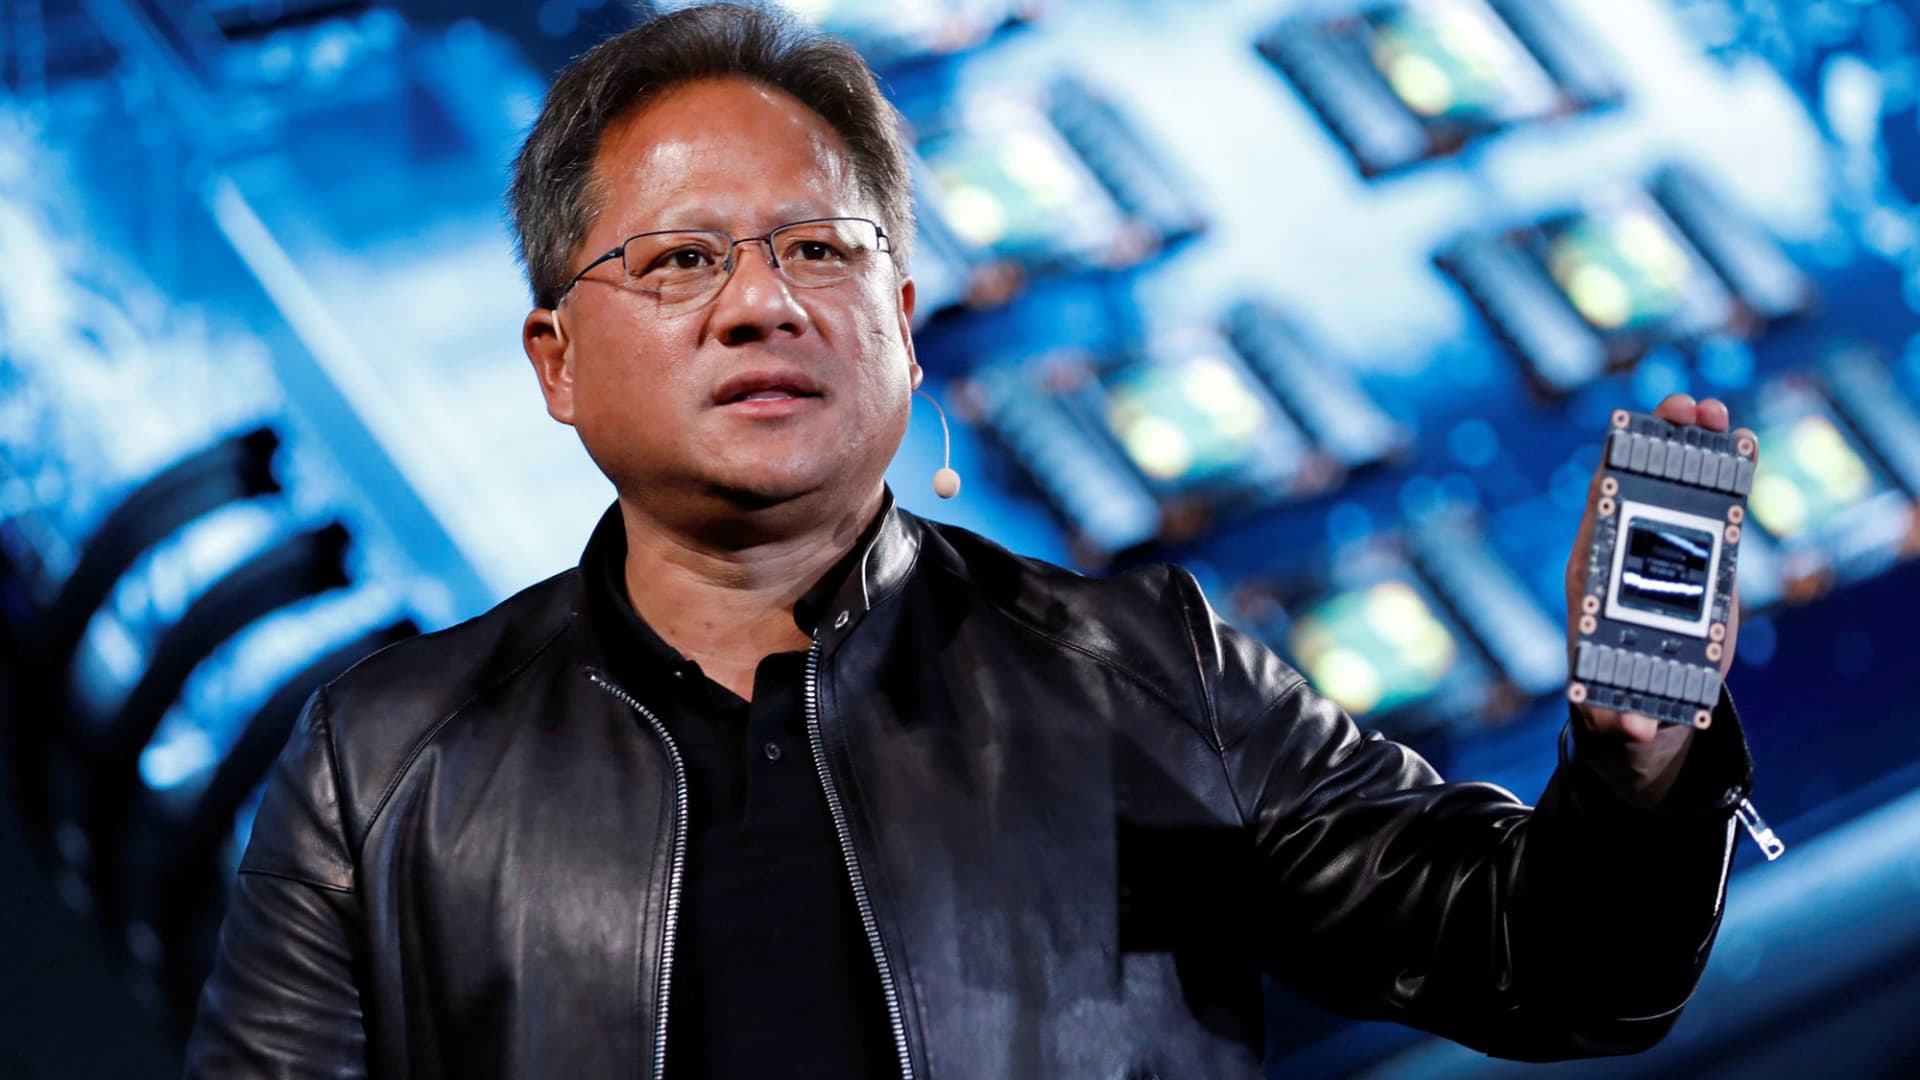 Nvidia shares spike 18% on huge forecast beat driven by A.I. chip demand